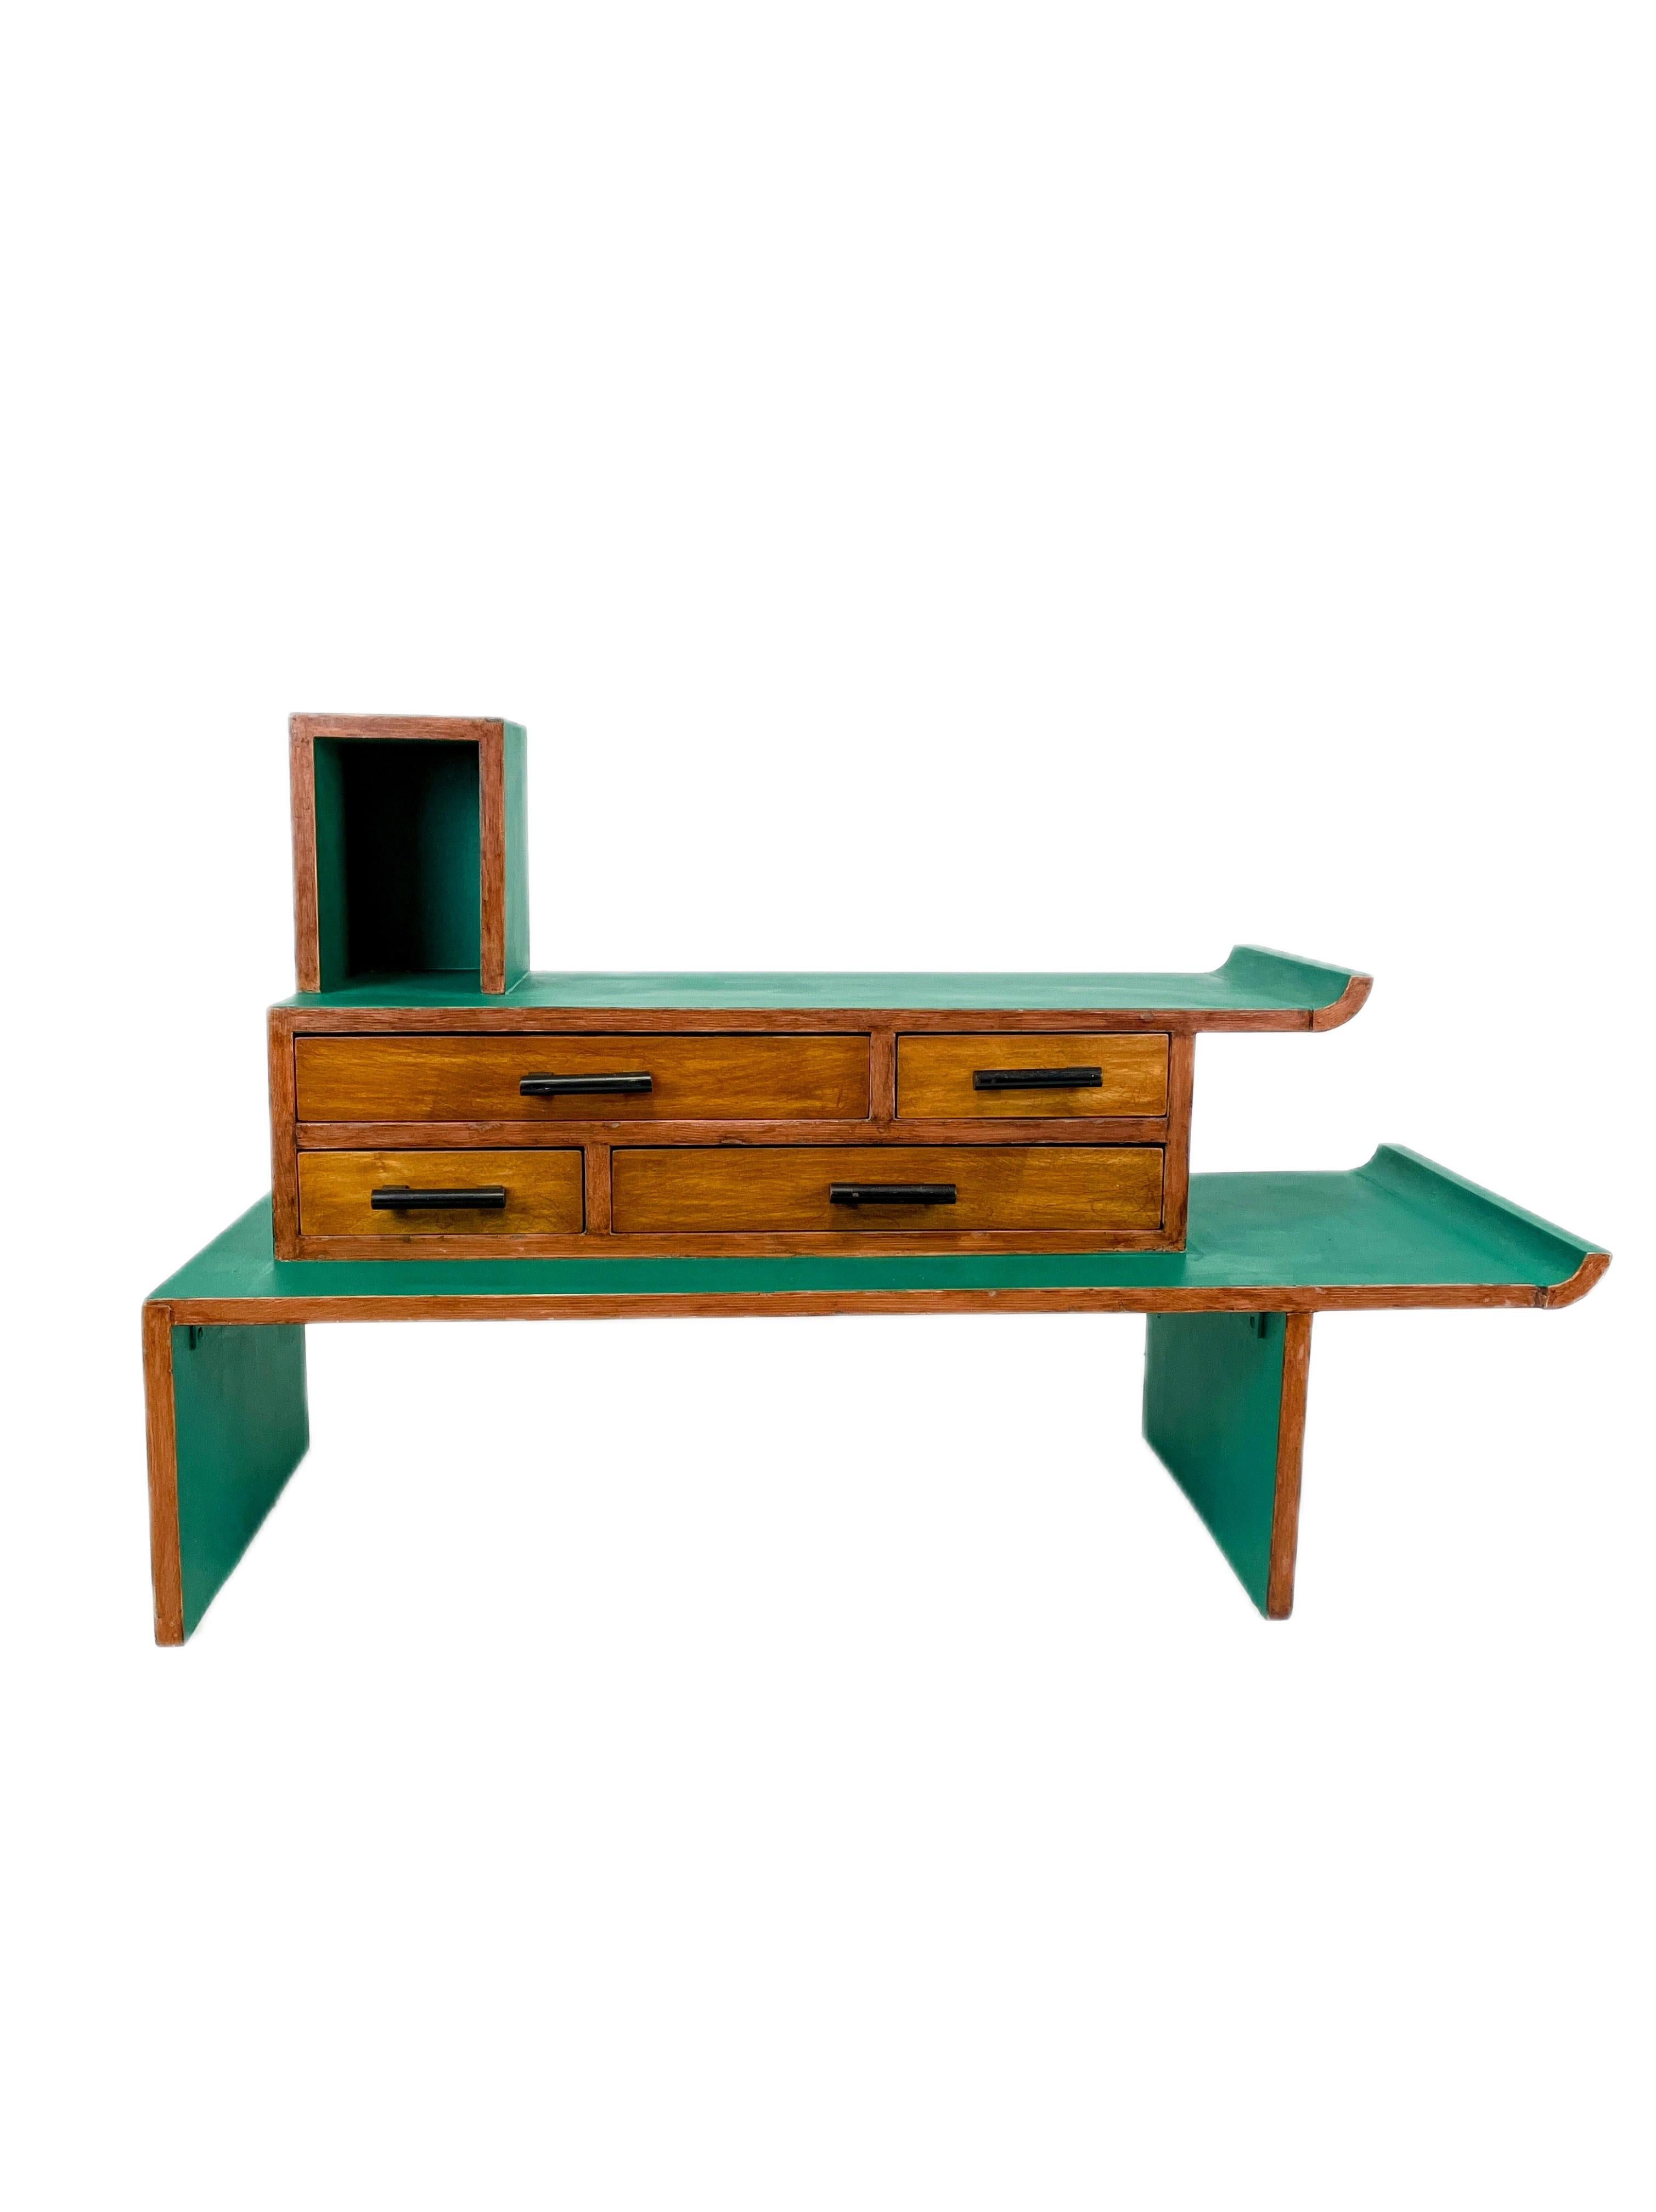 Unknown Art Deco Bookshelf attributed to Paul Frankl, 1920s For Sale